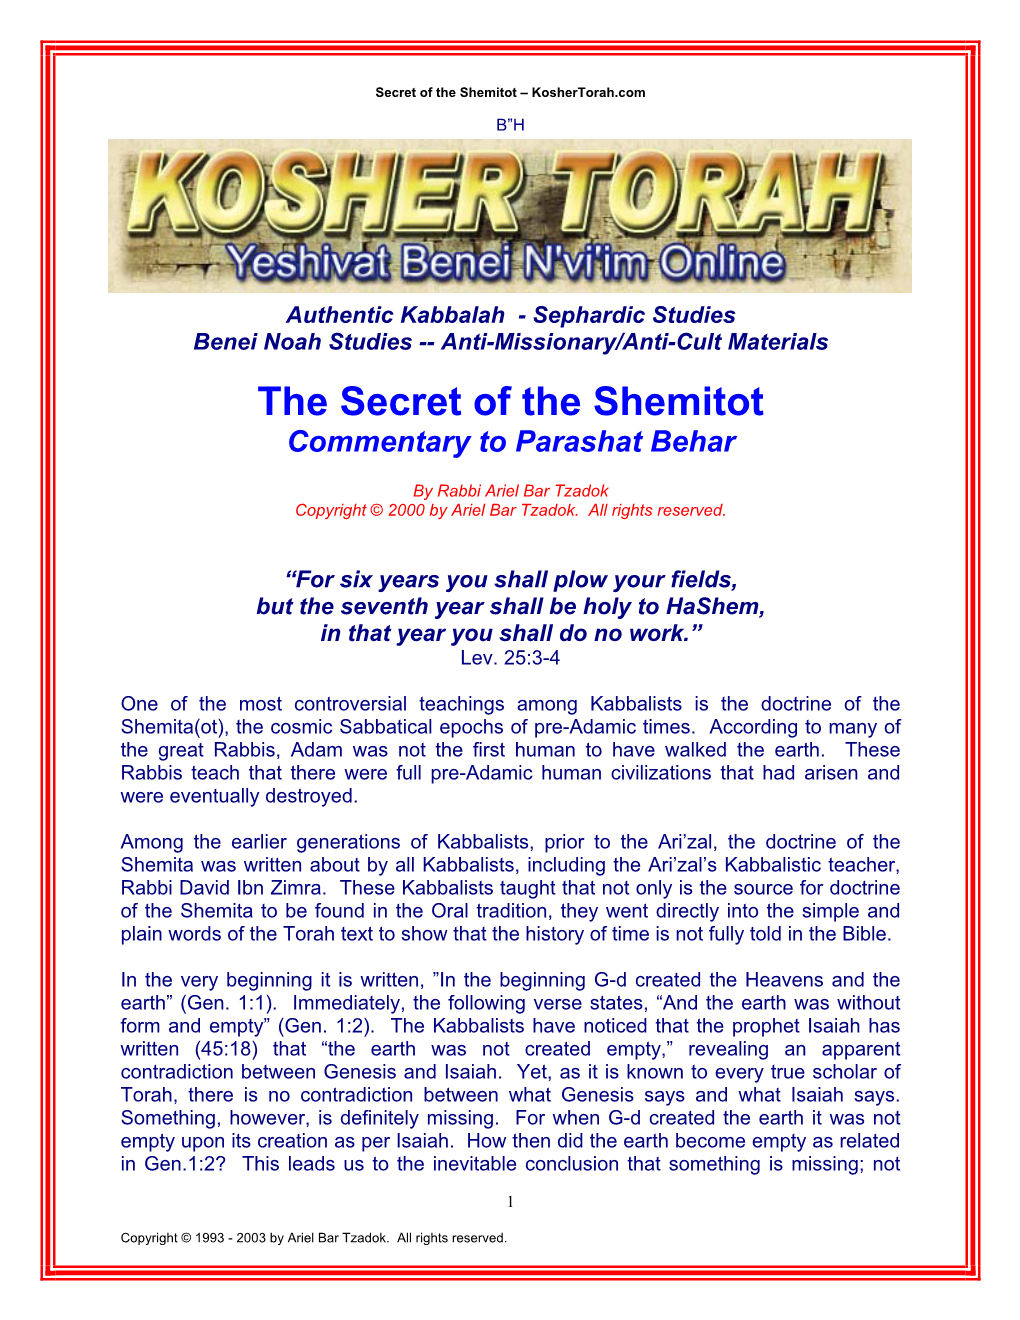 The Secret of the Shemitot Commentary to Parashat Behar